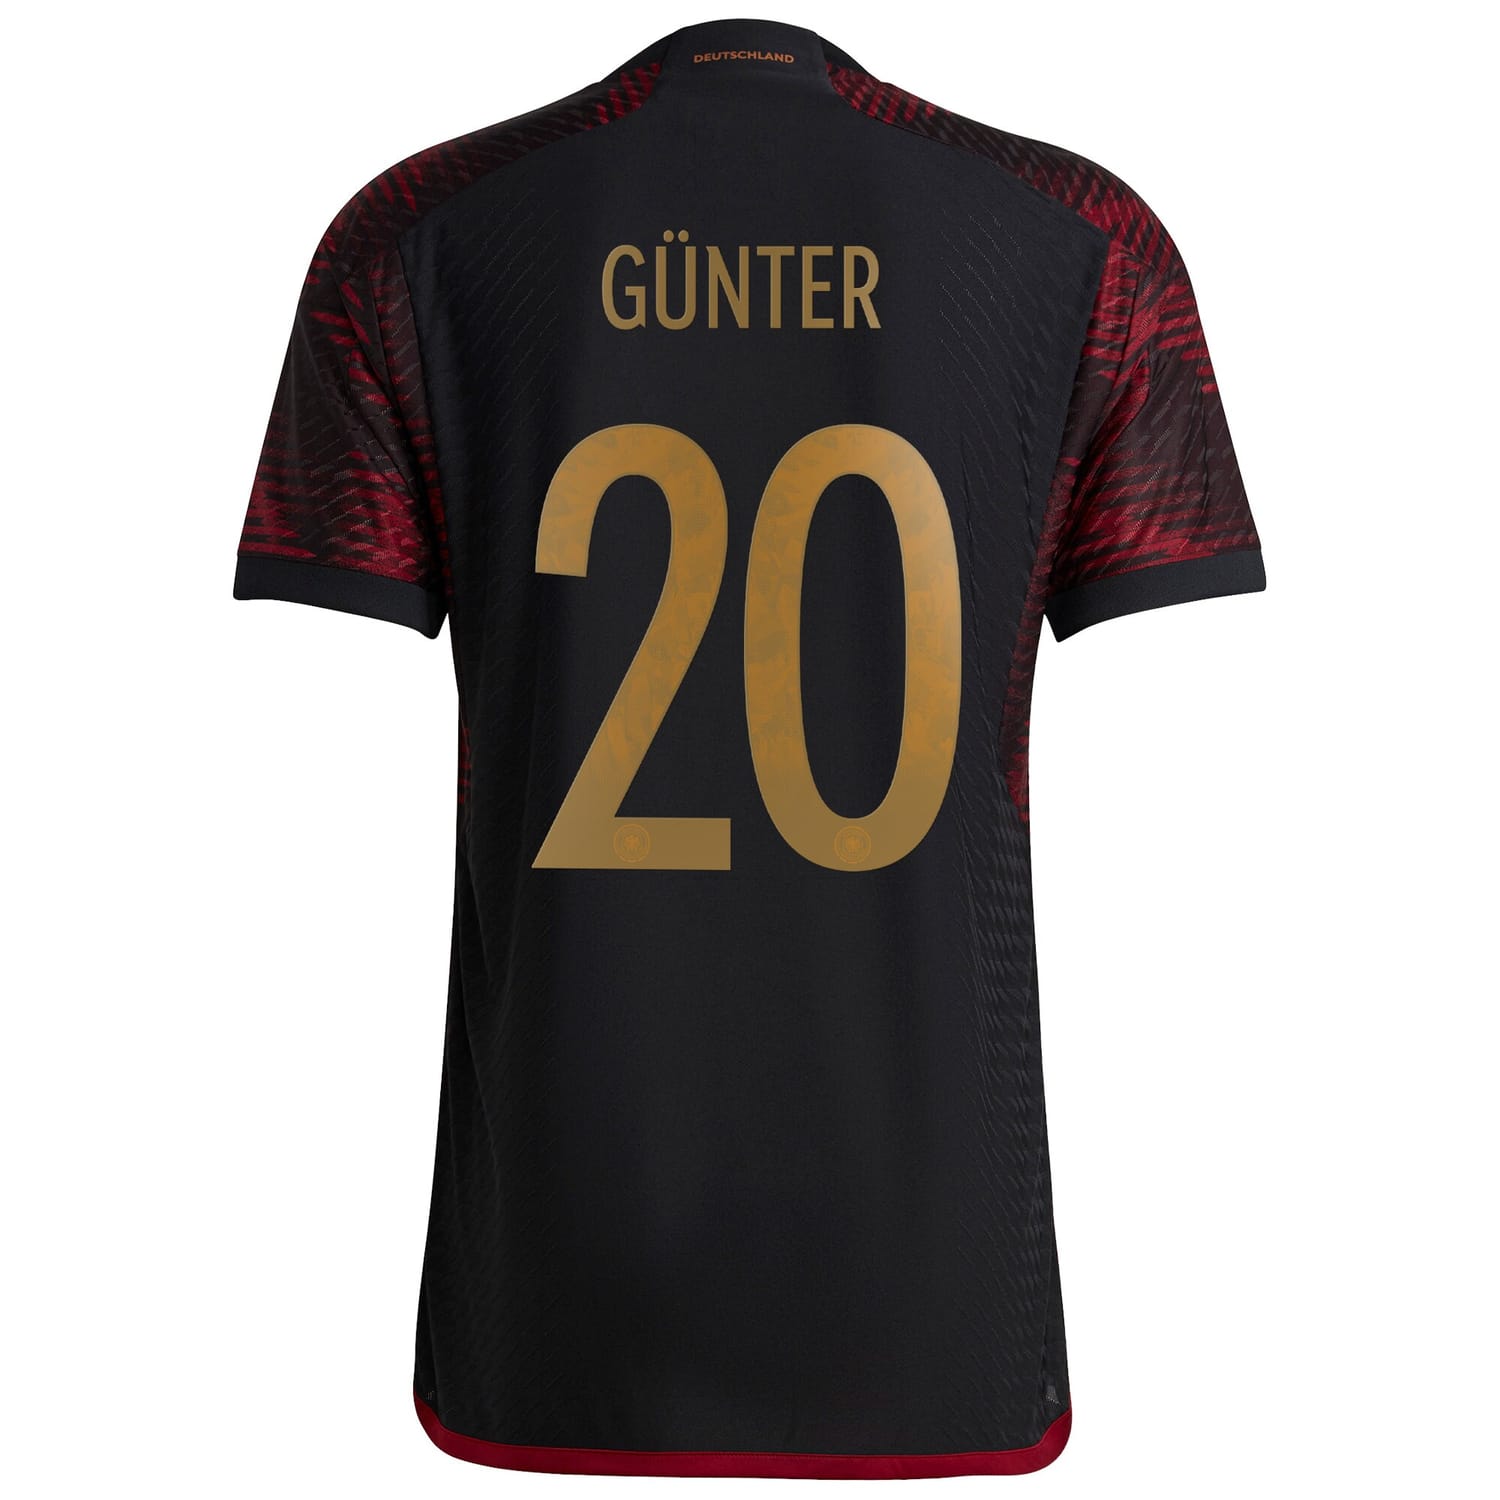 Germany National Team Away Authentic Jersey Shirt 2022 player Christian Günter 20 printing for Men